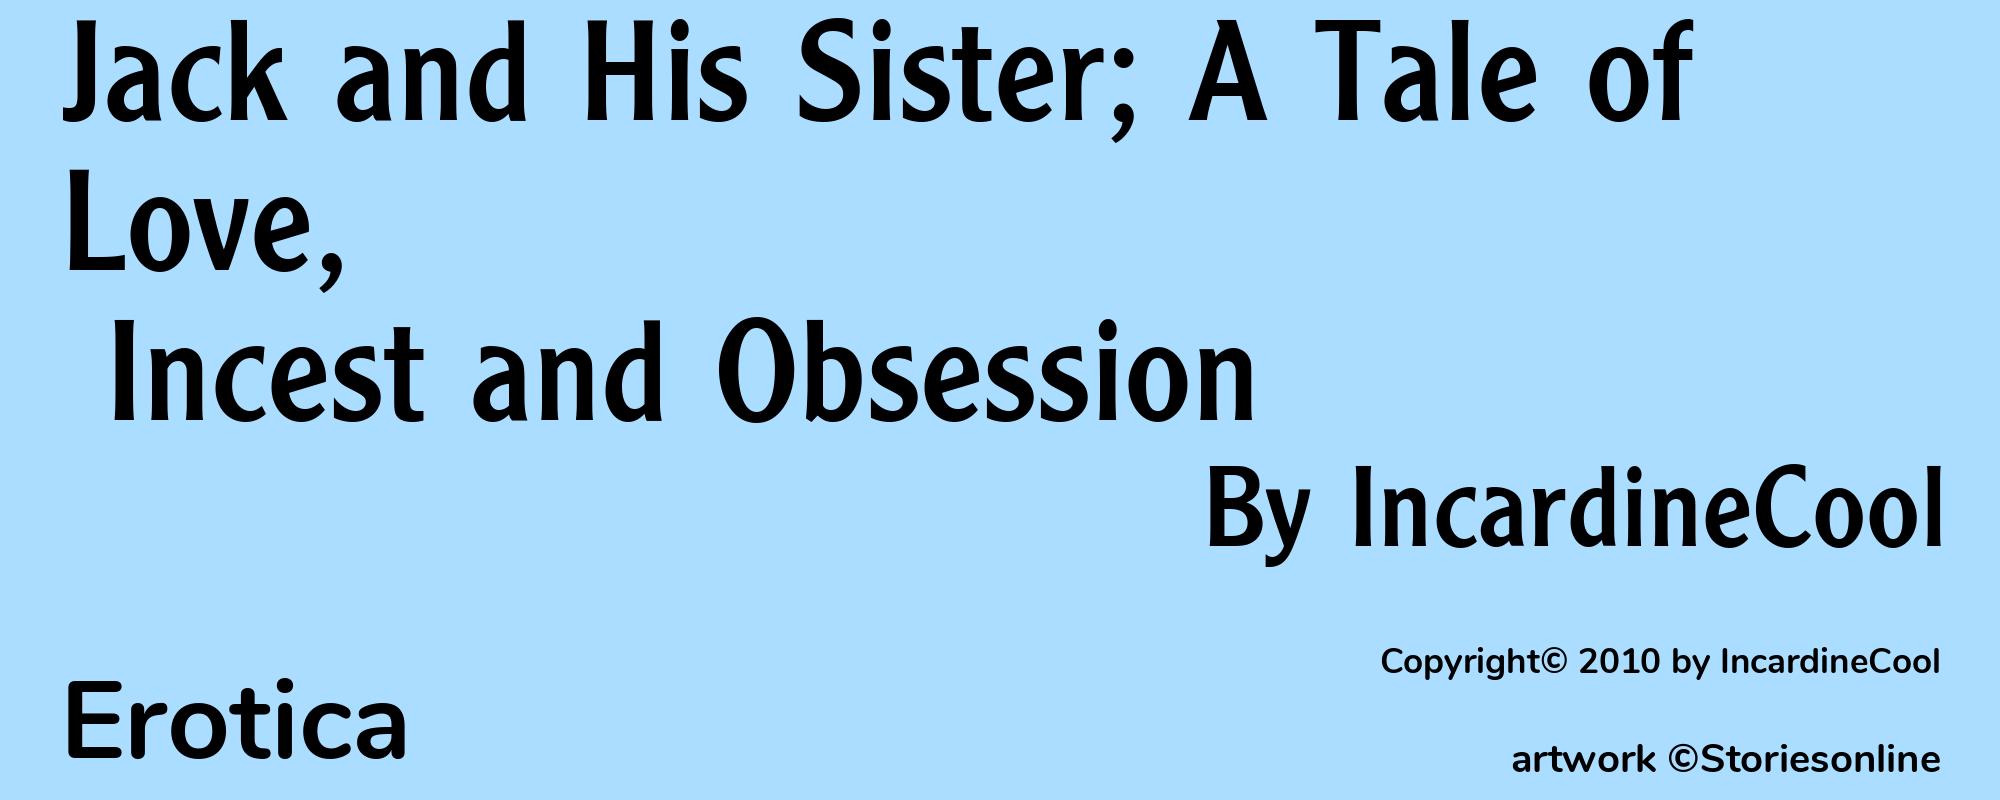 Jack and His Sister; A Tale of Love, Incest and Obsession - Cover